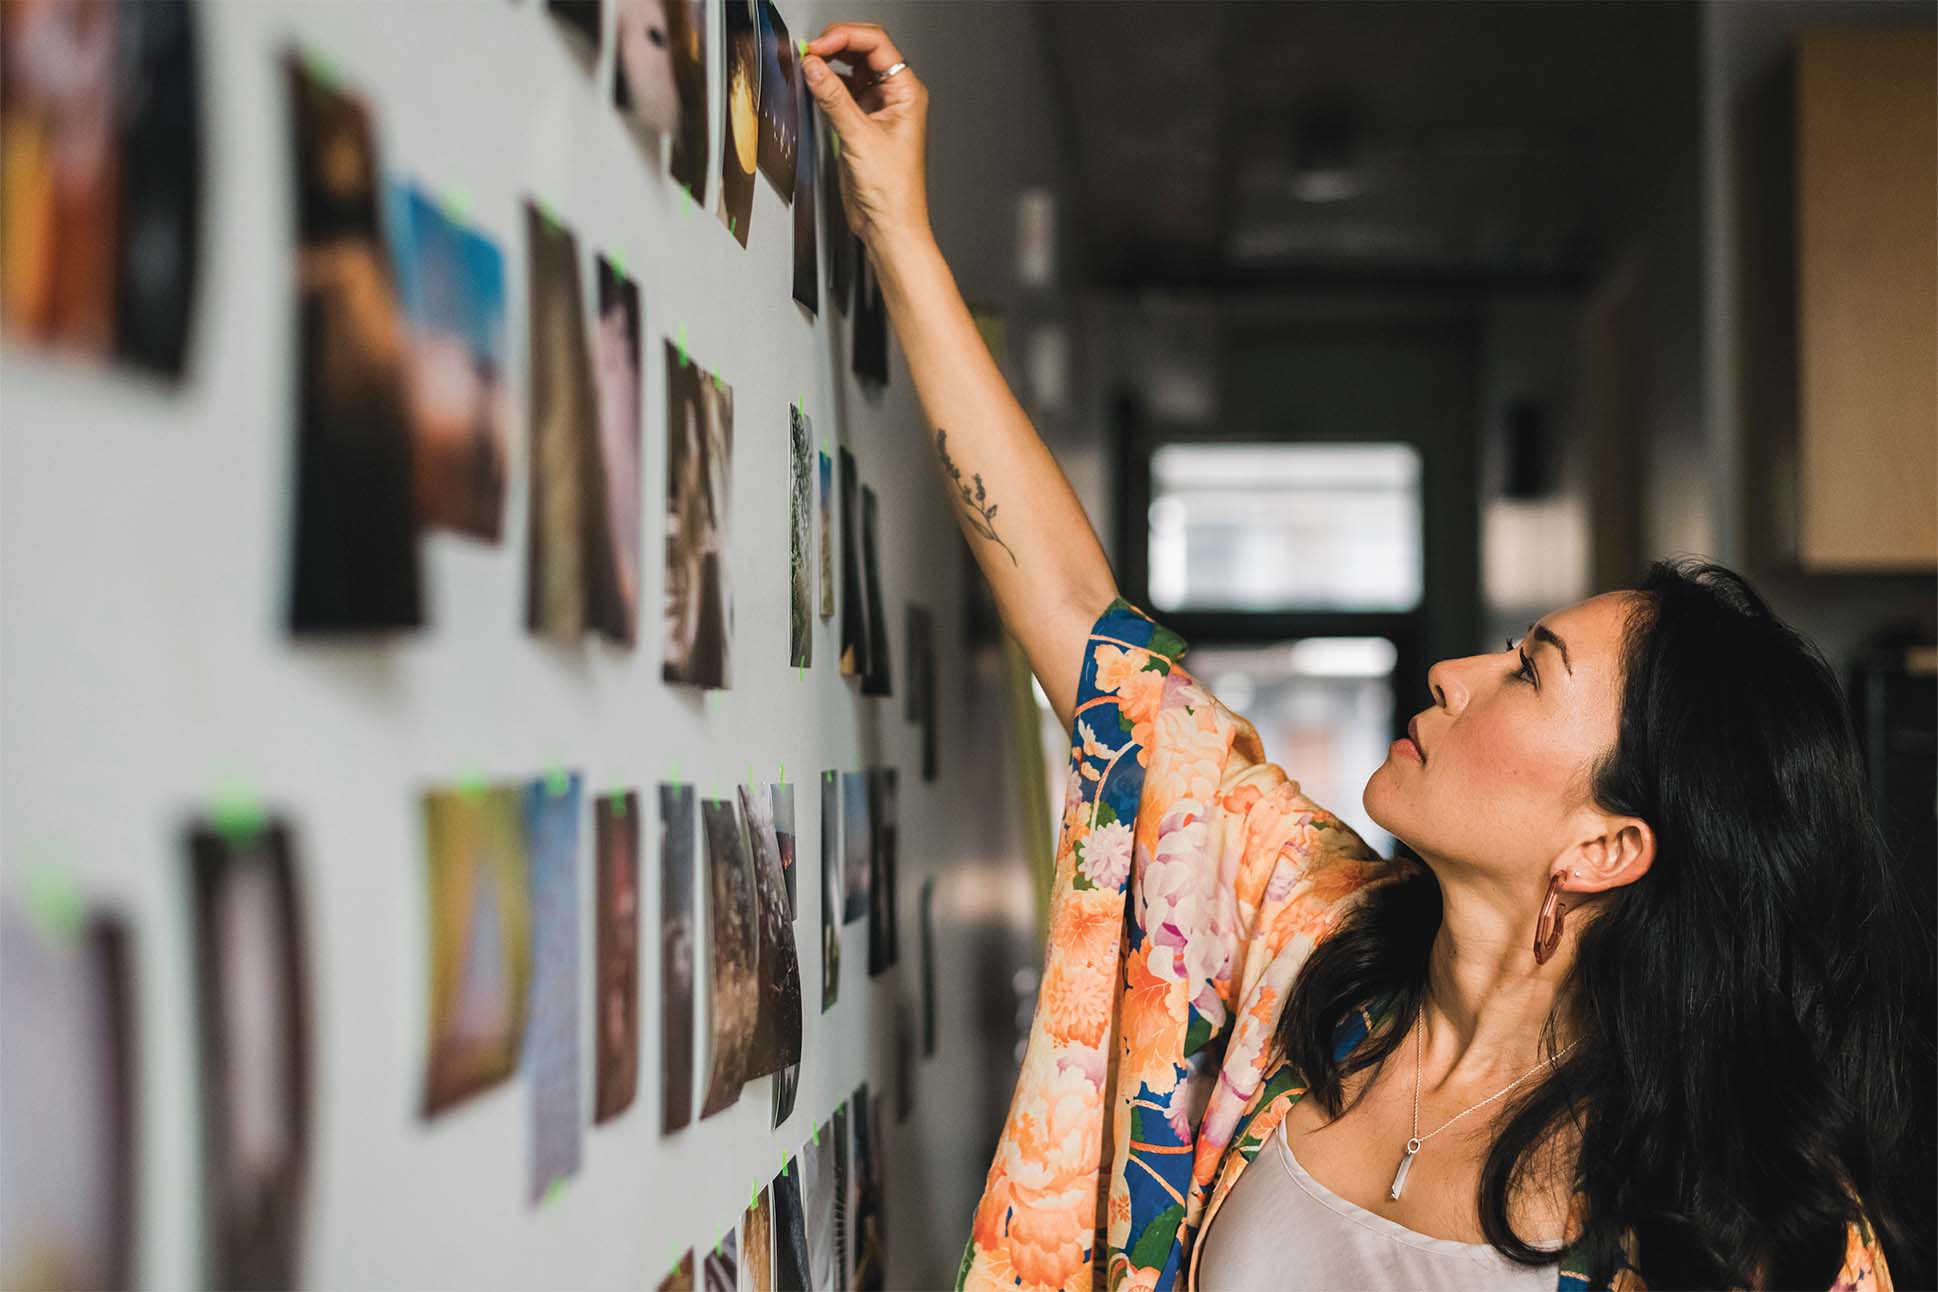 A person with tattoos on the arm wearing a floral print garment reaches out to hang photos on a wall filled with various pictures.
